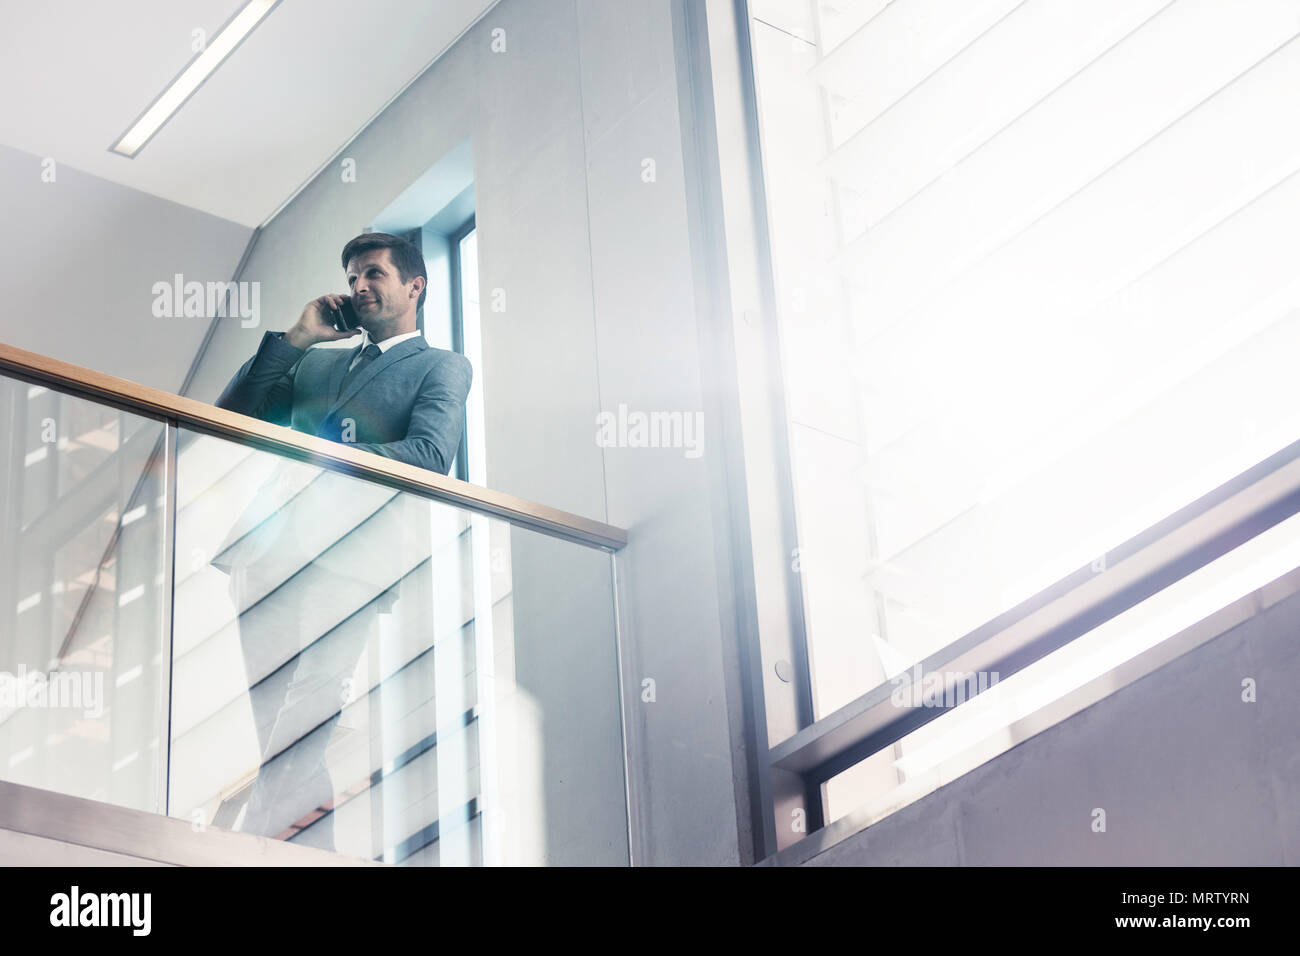 Low angle view businessman standing by railing and talking on mobile phone. Office manager making a phone call in office. Stock Photo